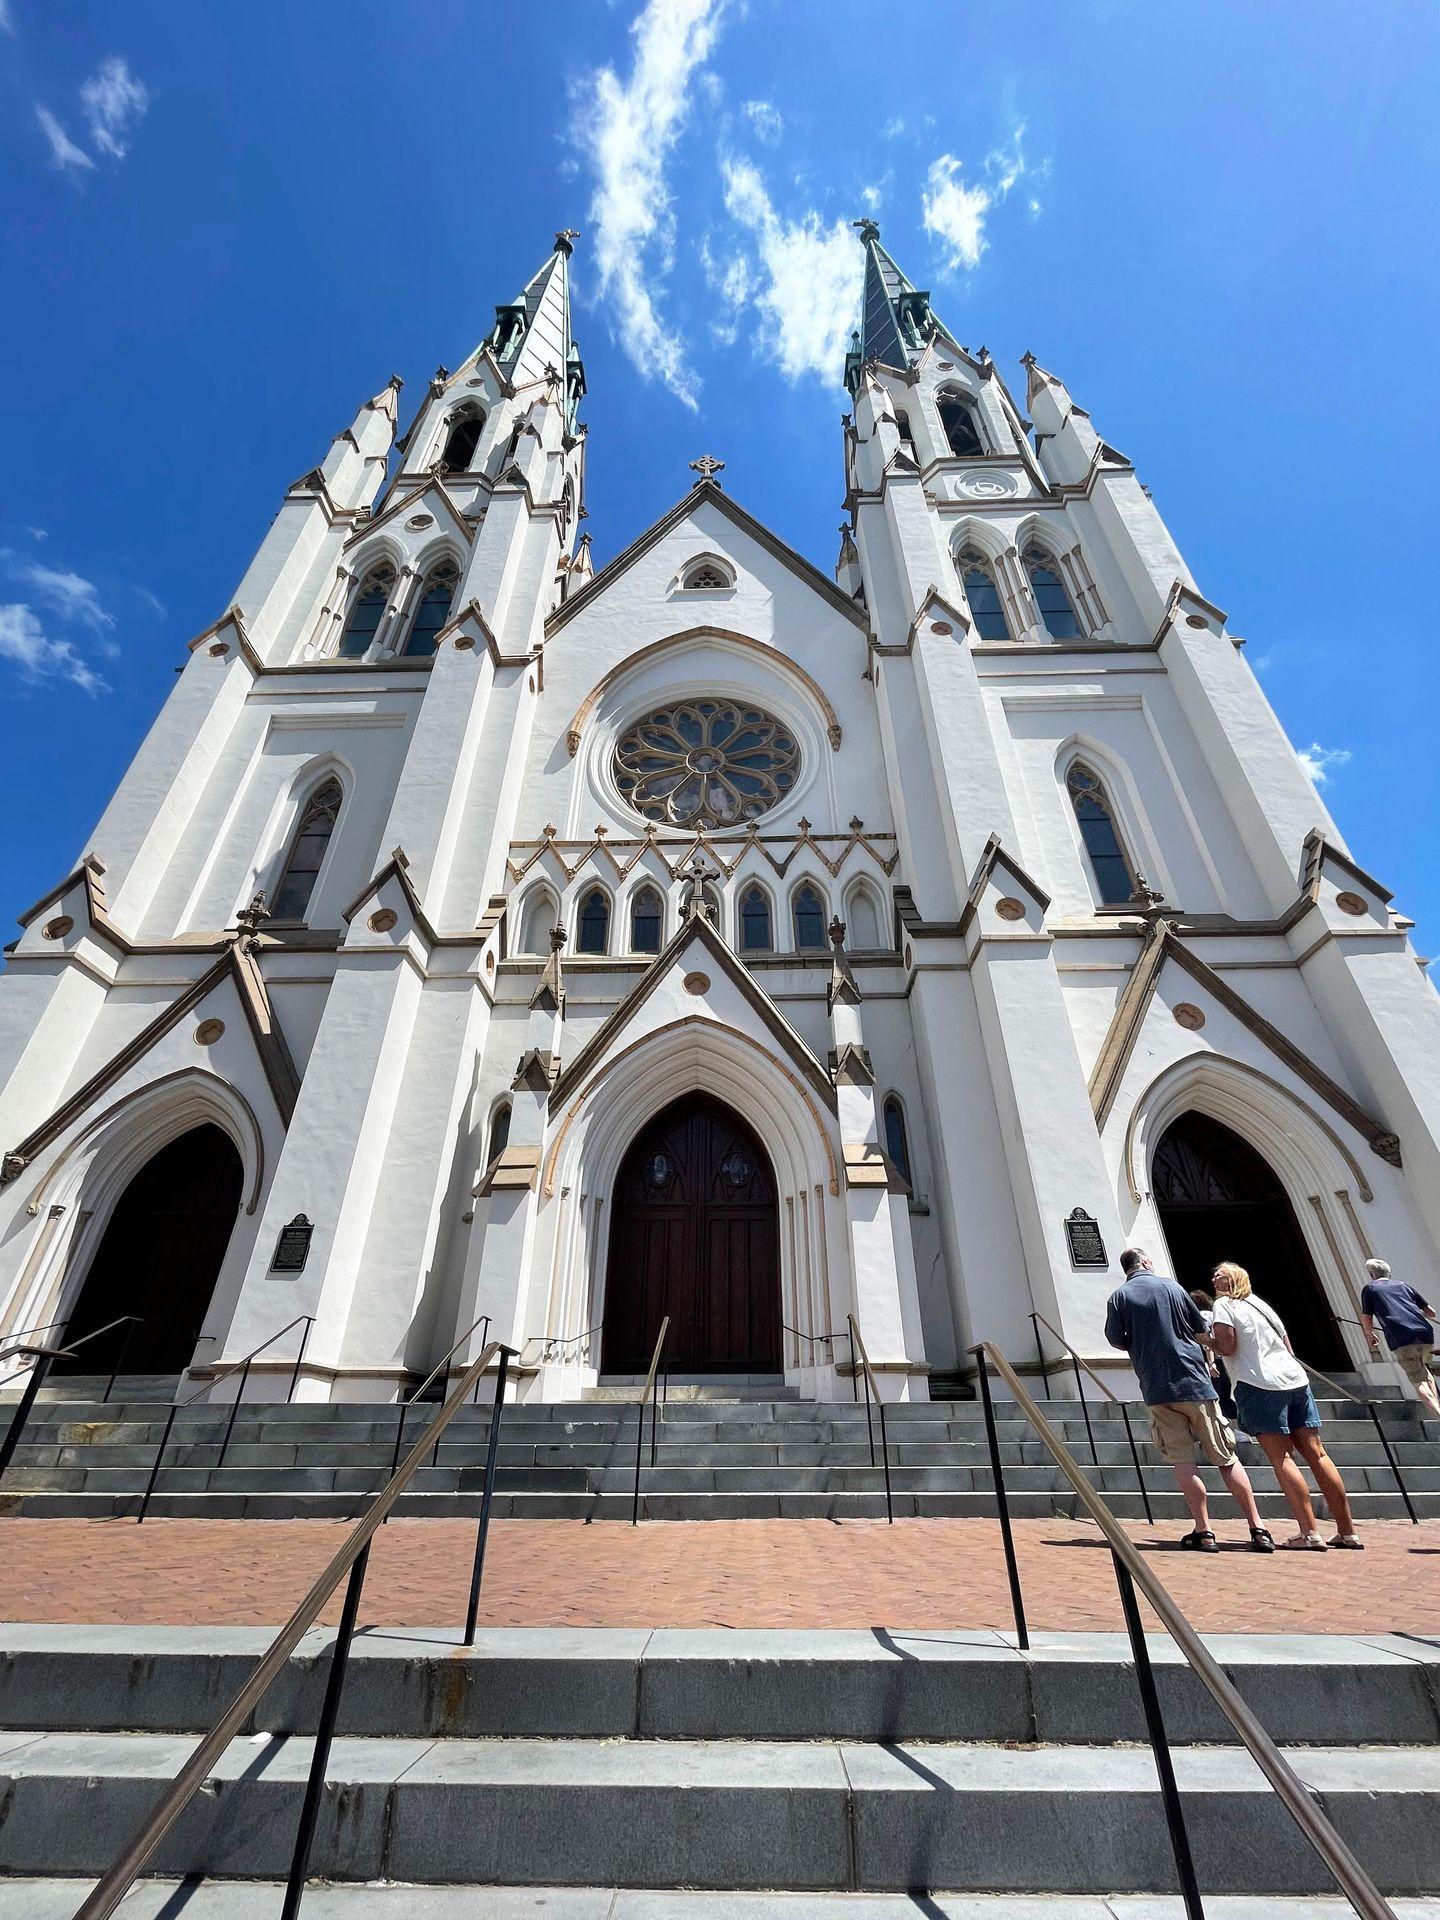 Looking up at the Cathedral Basilica, a large white church in downtown Savannah.